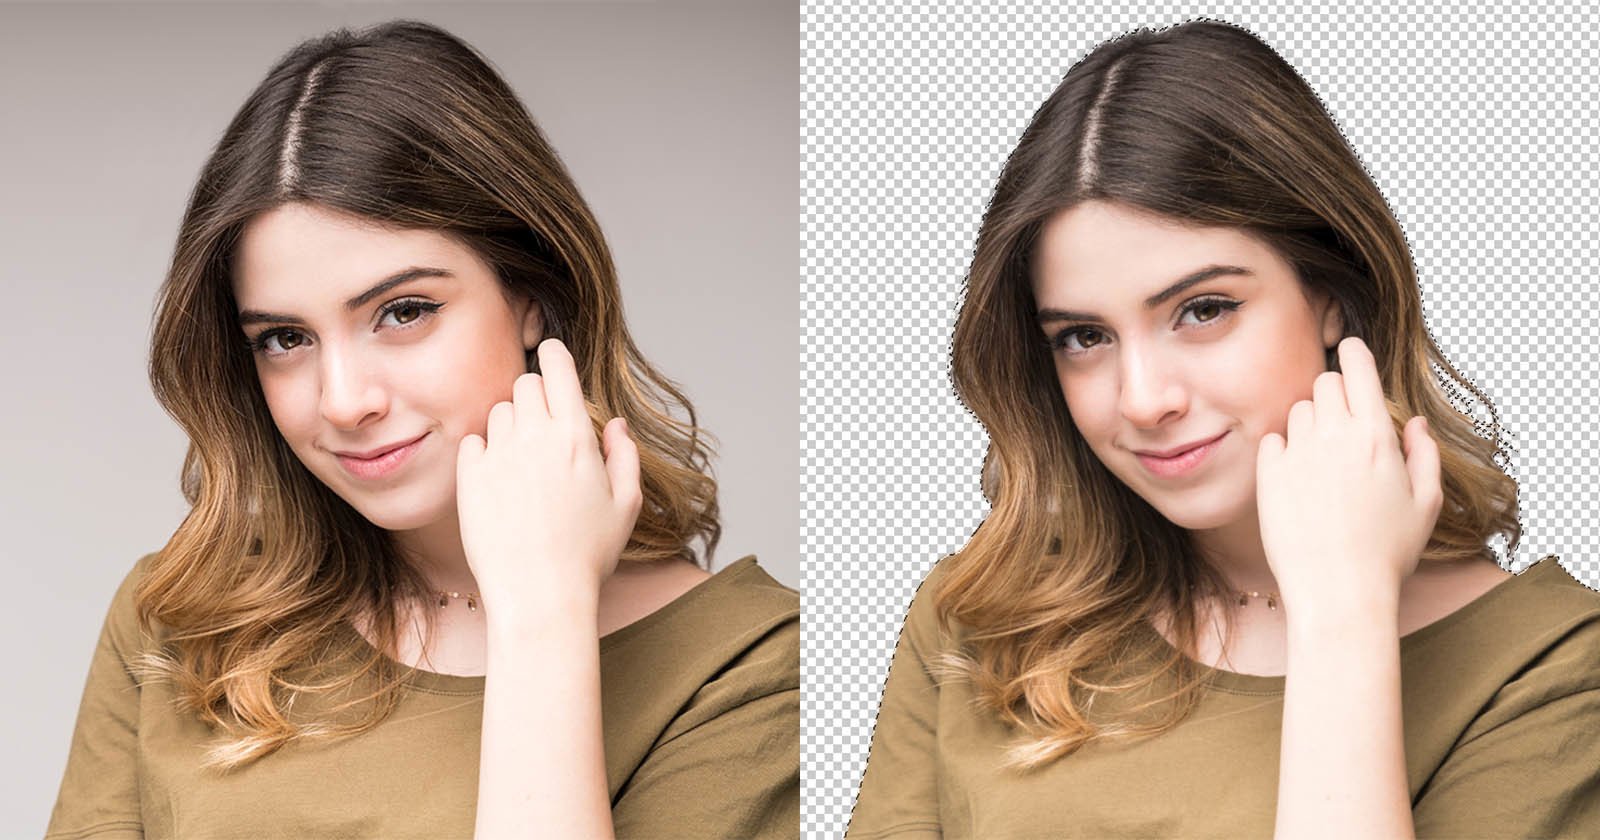 How to Remove a Background in Photoshop